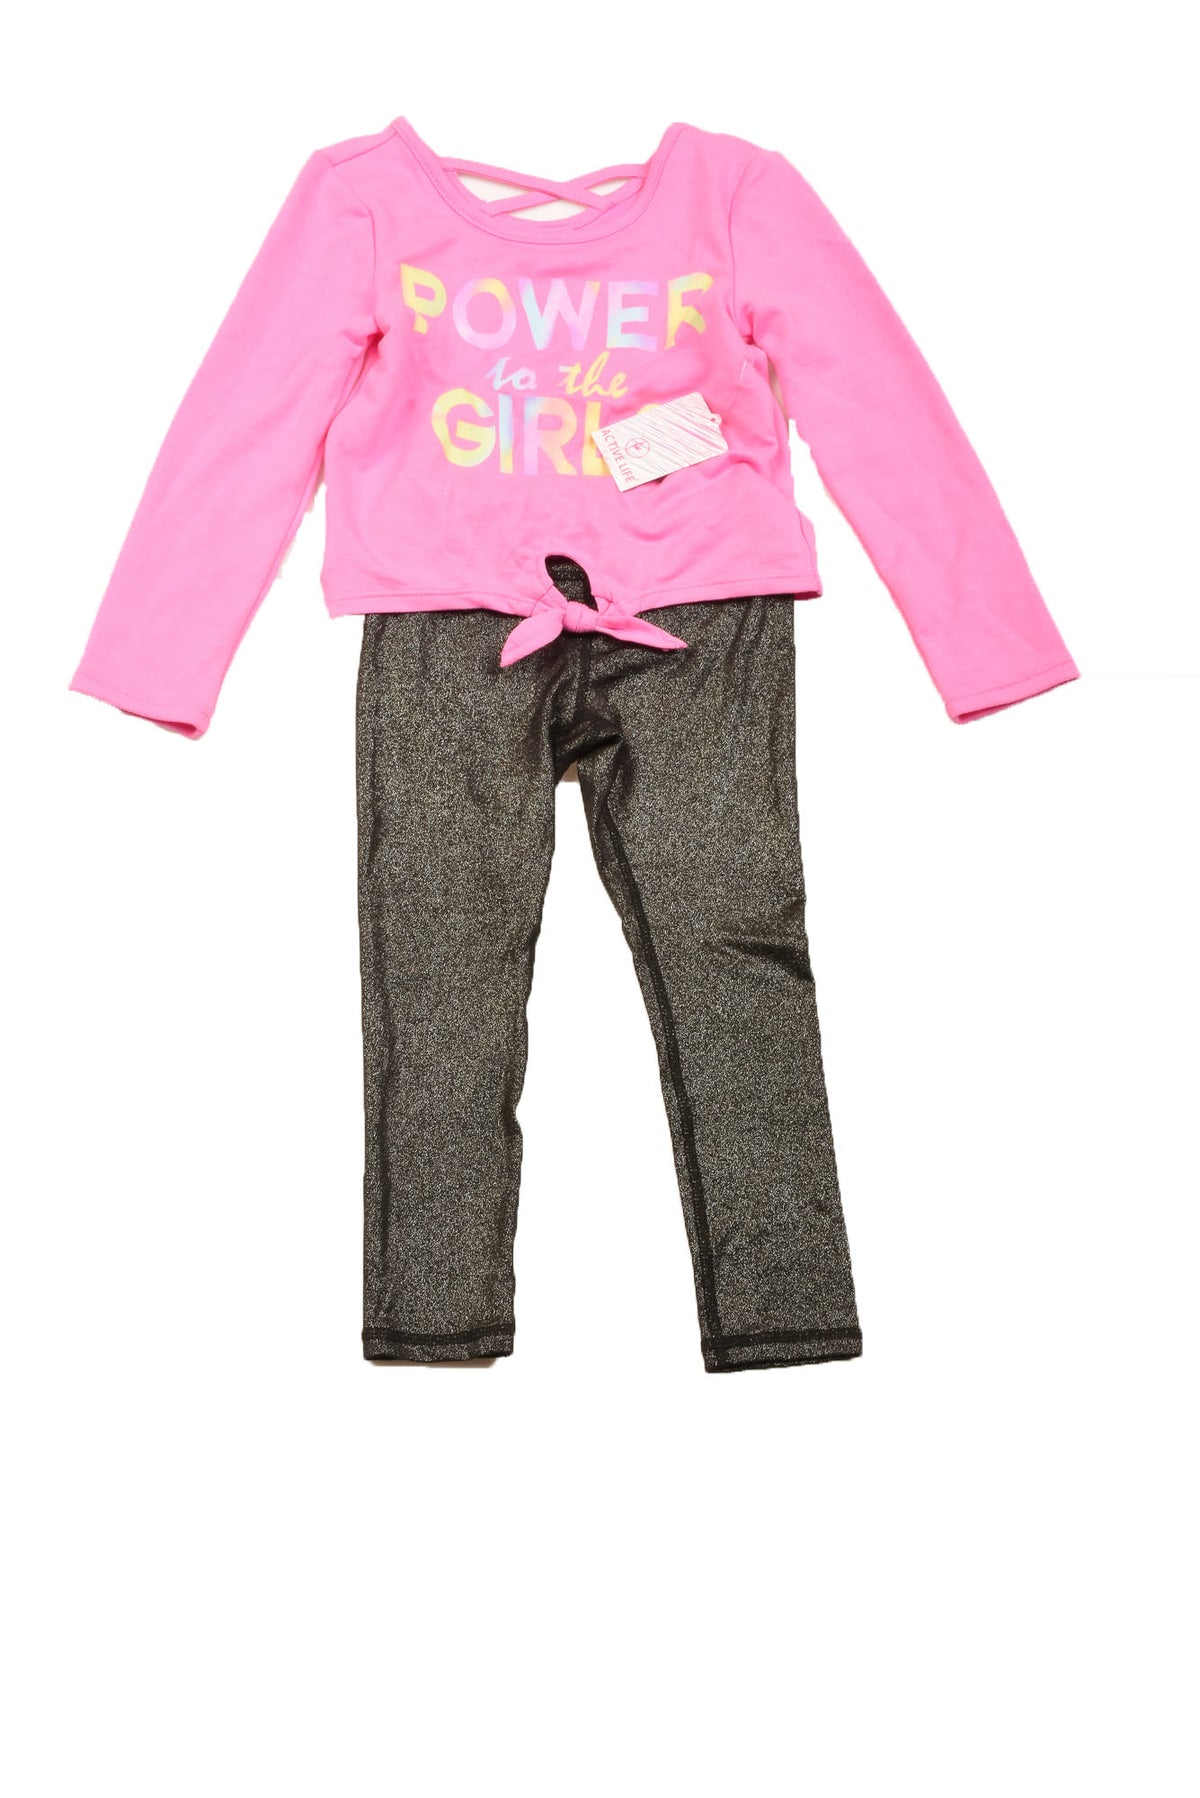 Active Life Size 4 Toddler Girl&#39;s 2pc. Outfit